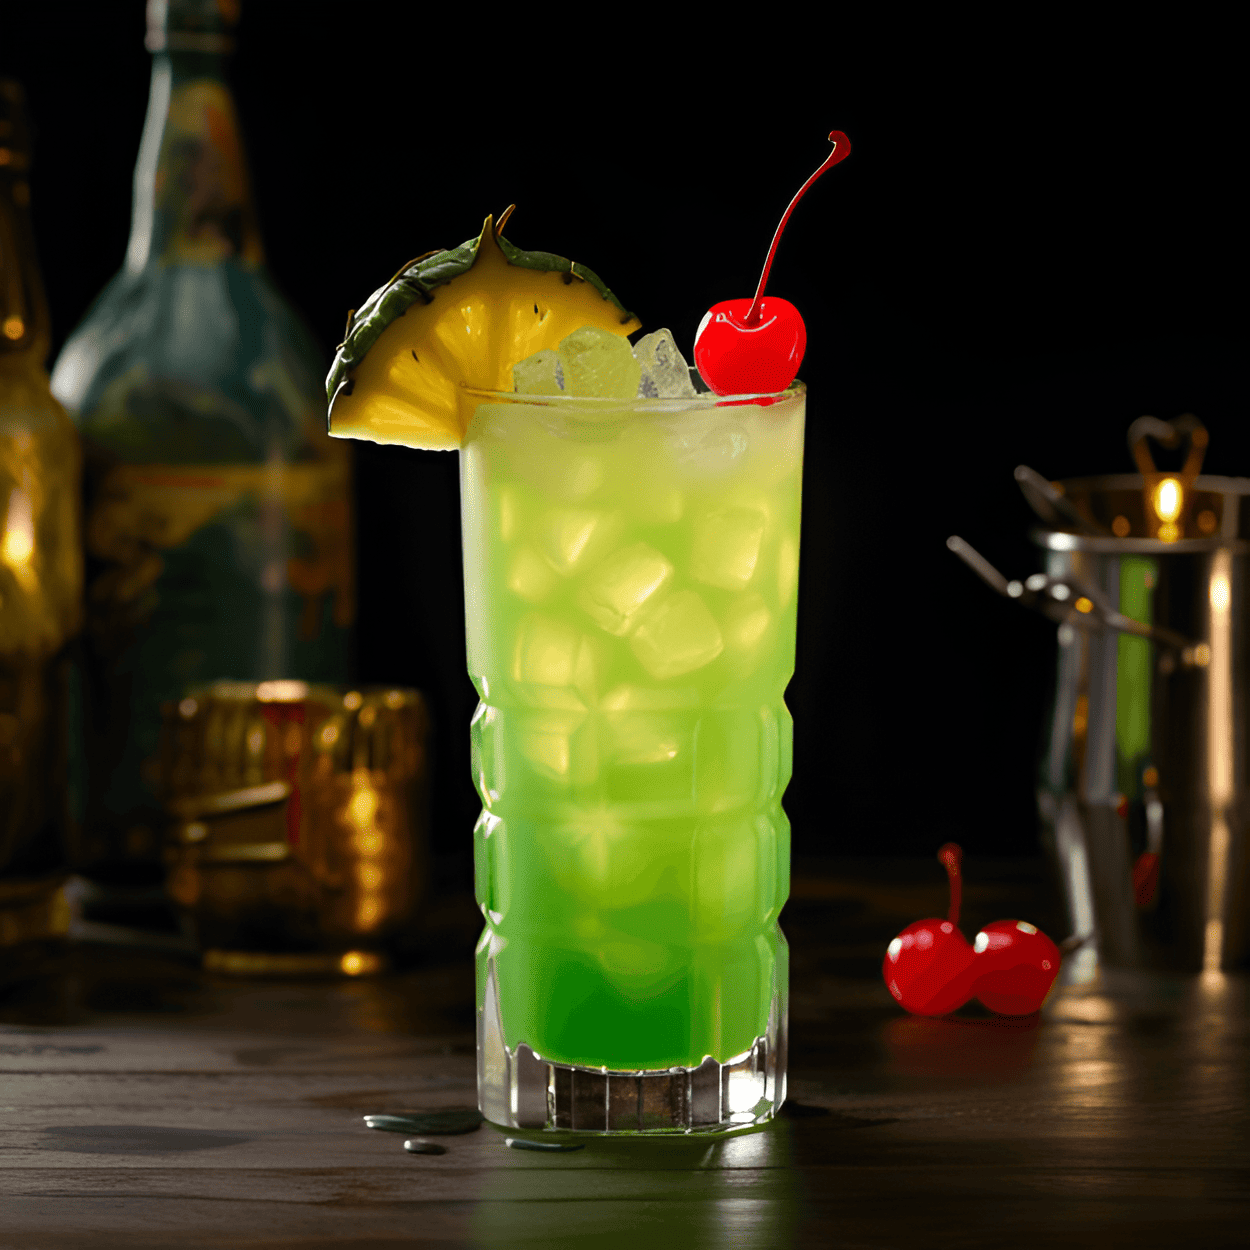 Alien Invasion Recipe - The Alien Invasion is a sweet and fruity cocktail with a strong kick. The combination of melon liqueur, coconut rum, and pineapple juice gives it a tropical and refreshing taste, while the vodka adds a strong and potent kick.